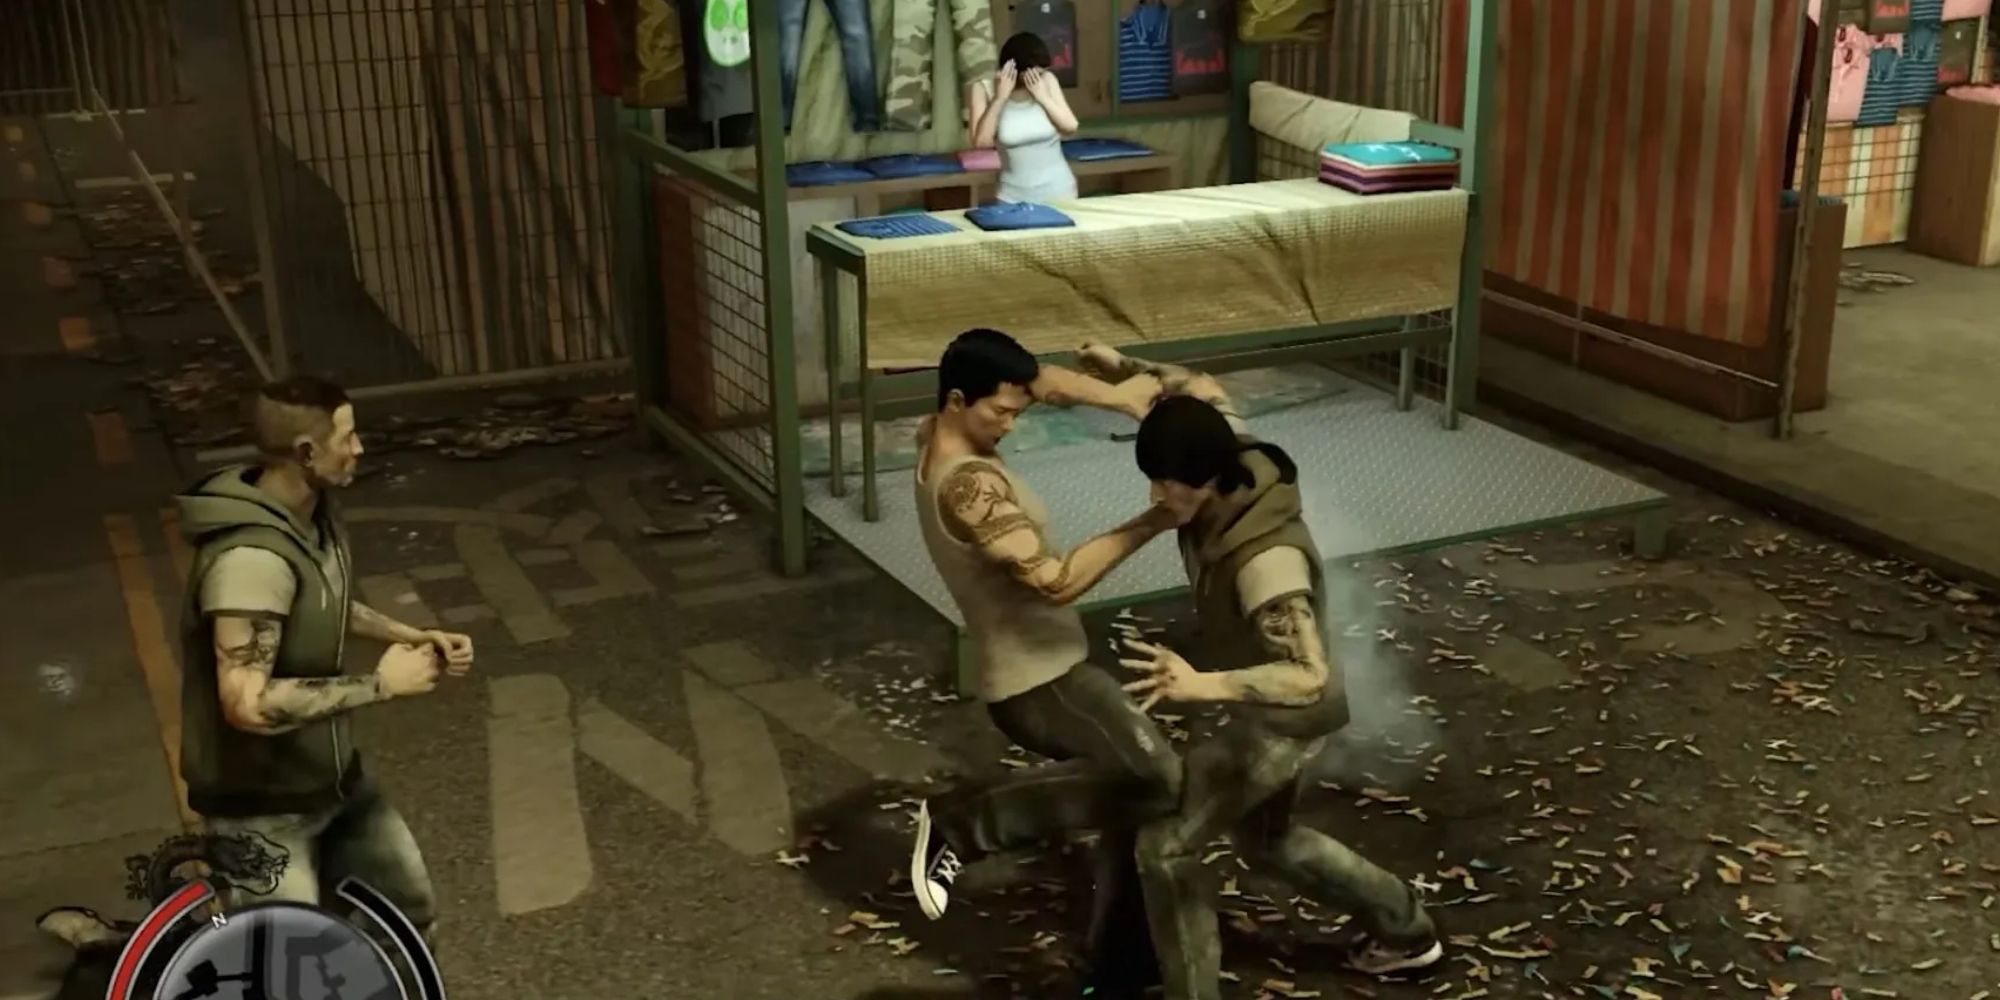 Sleeping Dogs Wei in combat as a woman covers her head on a bed in the corner